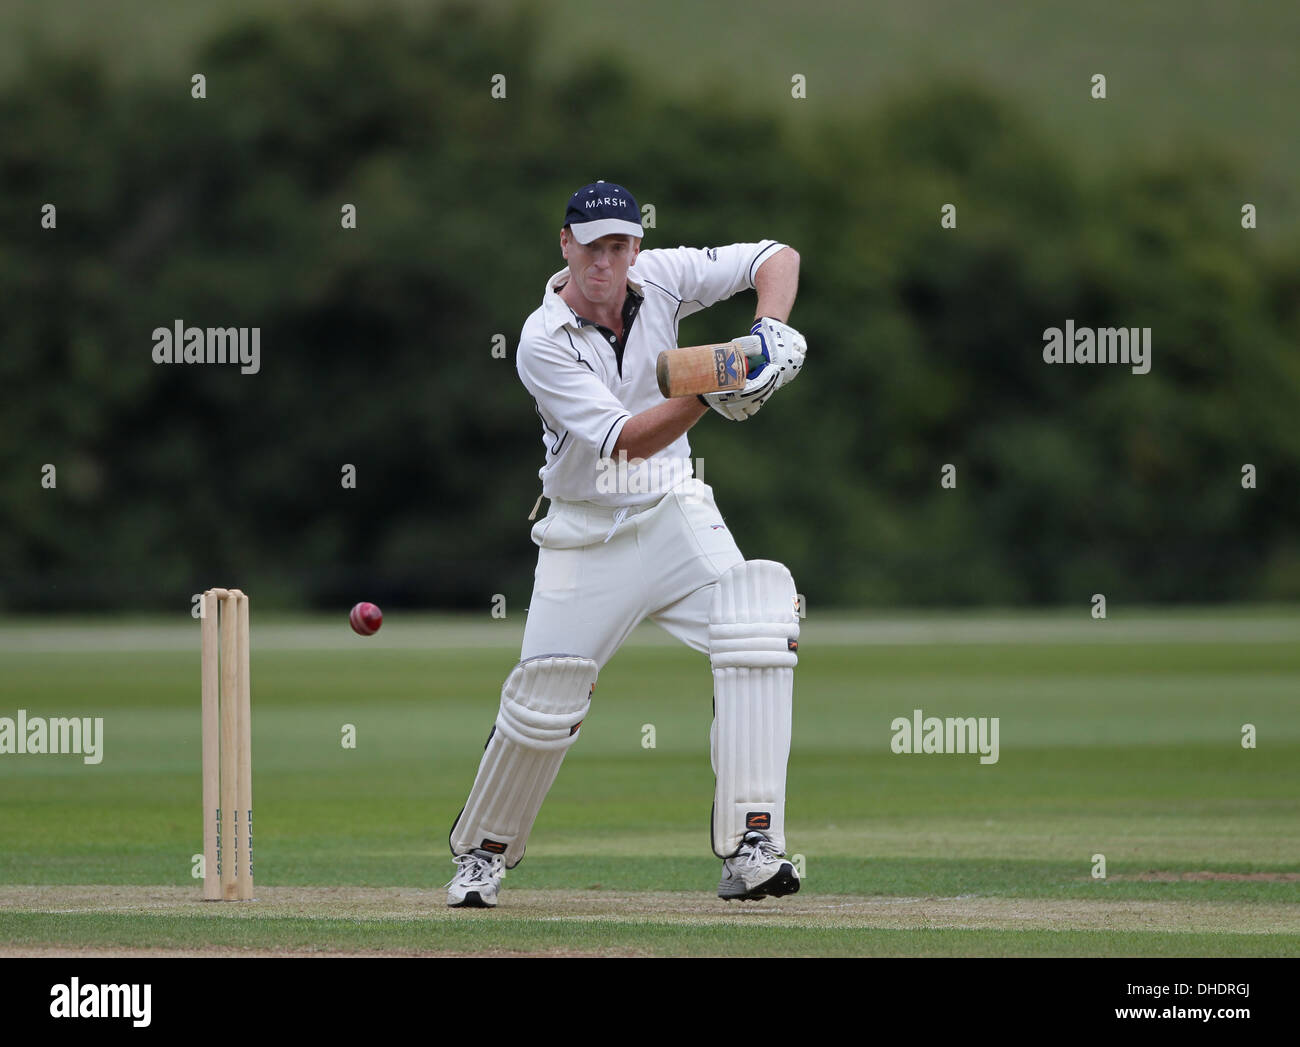 Actor Damian Lewis playing cricket for an Actors XI against the Authors CC at Wormsley Stock Photo